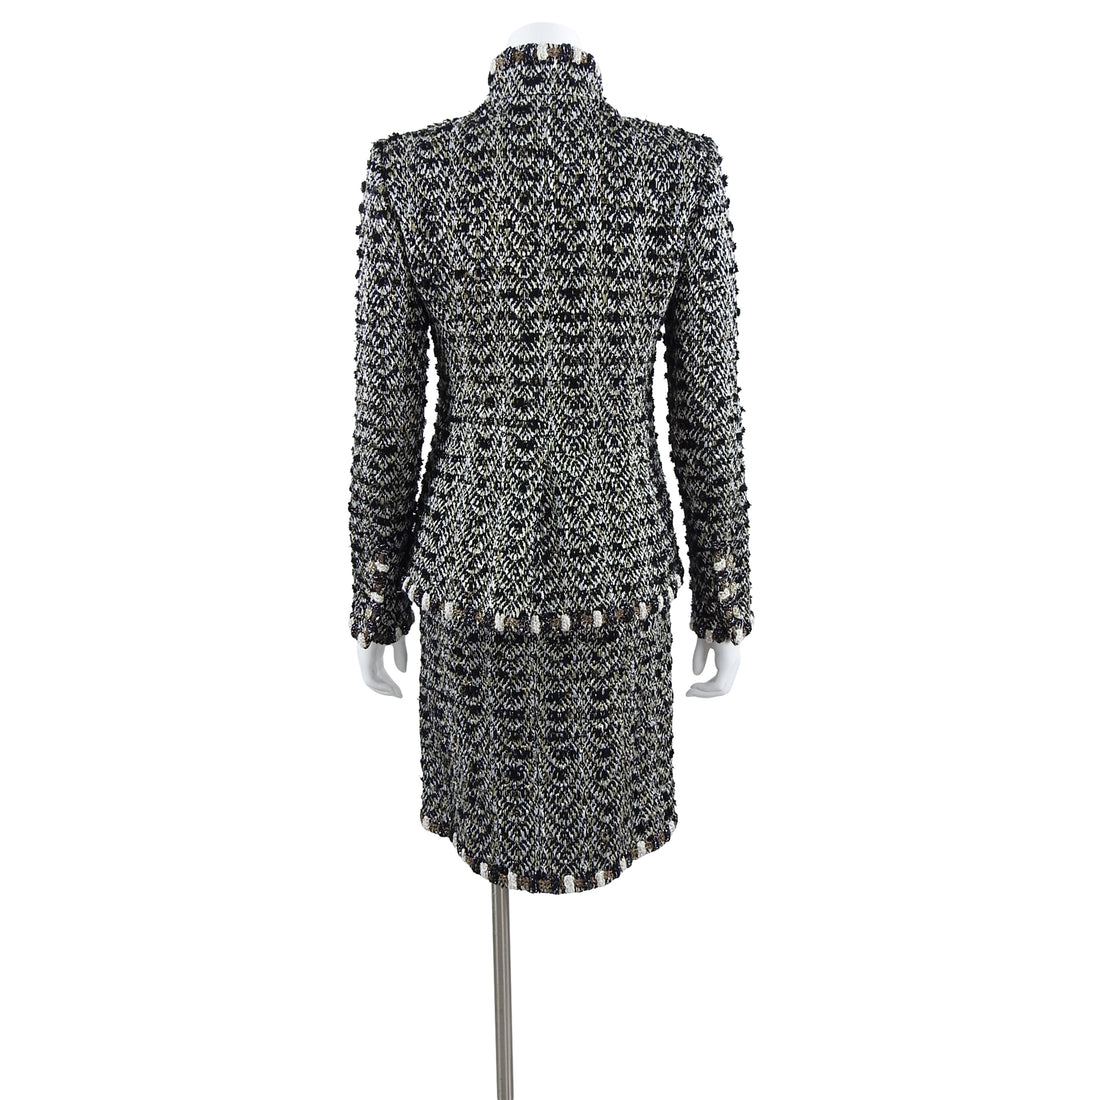 Chanel Pre-Fall 2012 Bombay Runway Gold Tweed Skirt Suit - 38 / 6